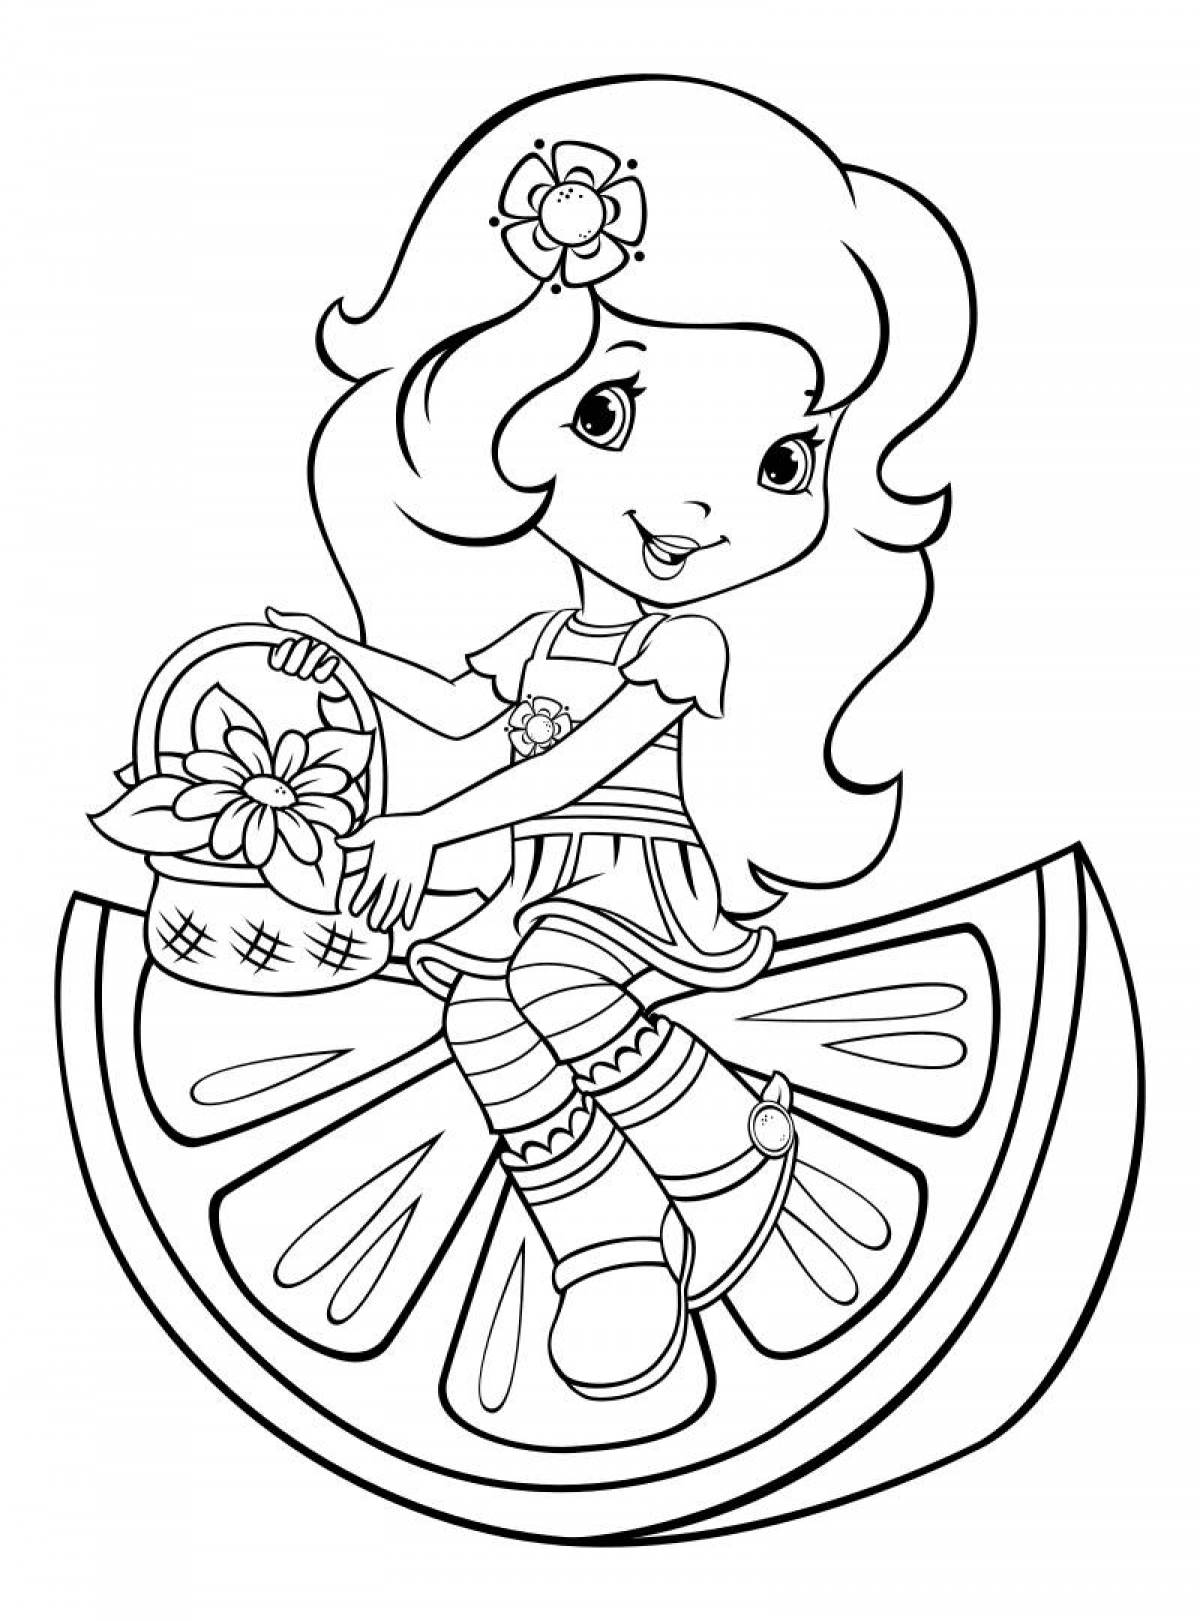 Creative coloring book for girls 5 years old